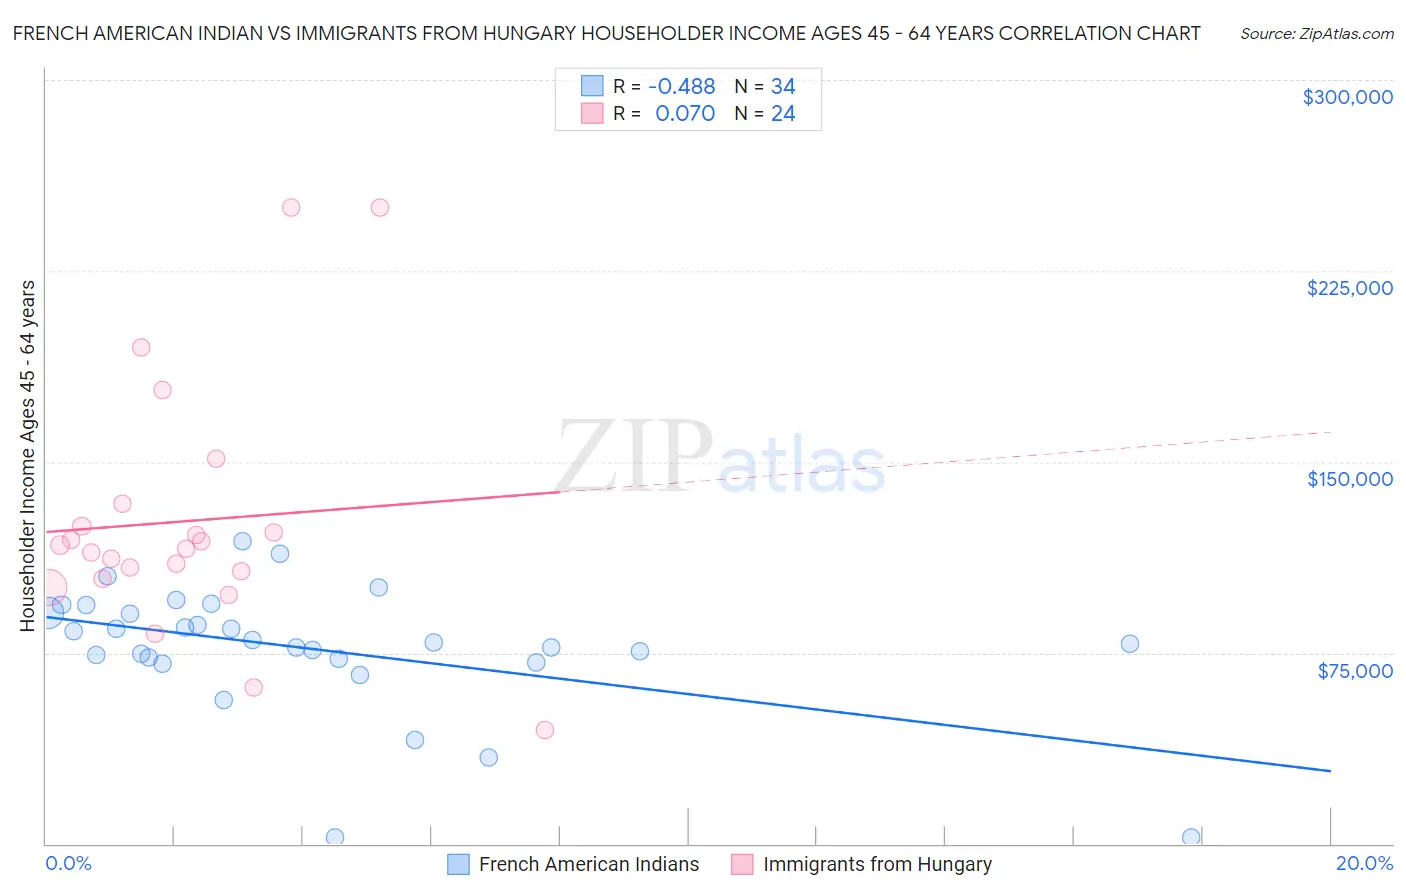 French American Indian vs Immigrants from Hungary Householder Income Ages 45 - 64 years